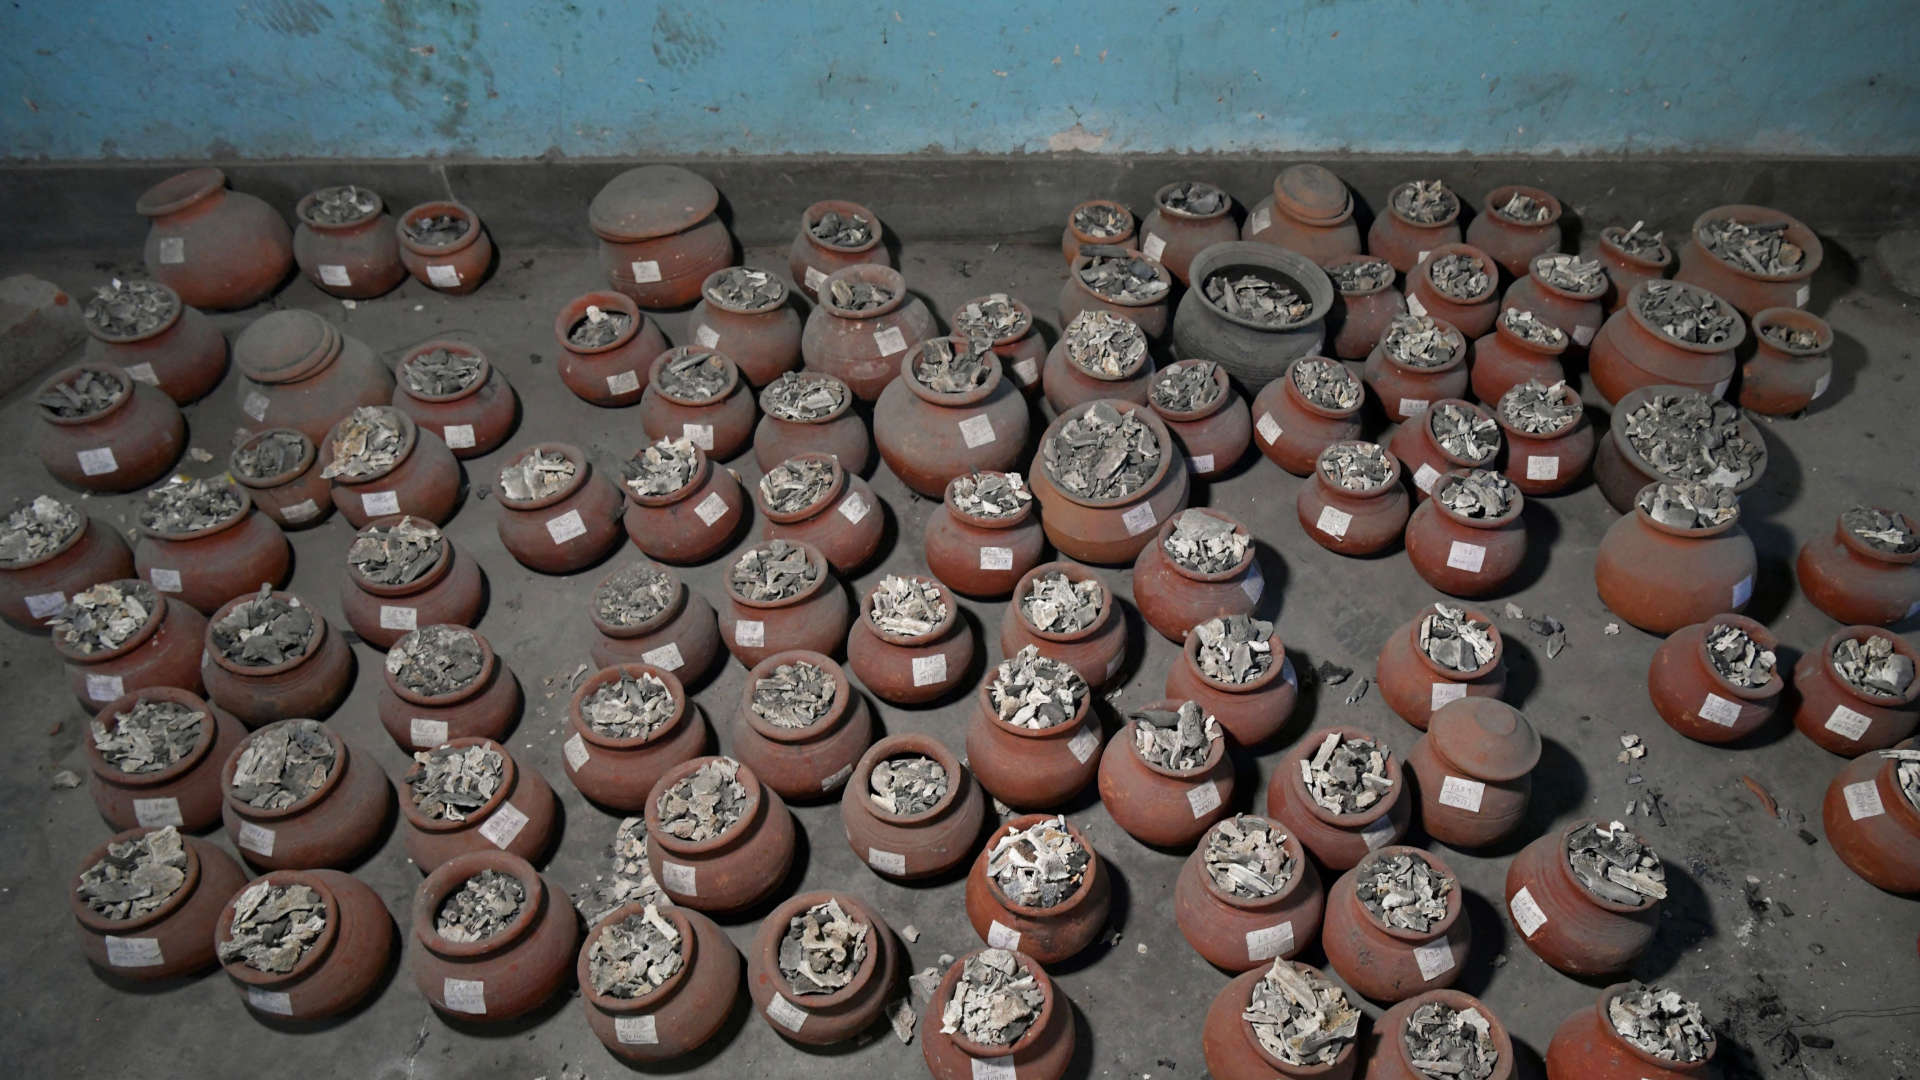 Unclaimed clay urns containing ashes of people who died due to Covid-19 lay on the ground at the Sumanahalli crematorium in the suburbs of Bengaluru, (formerly Bangalore), India on June 1, 2021.